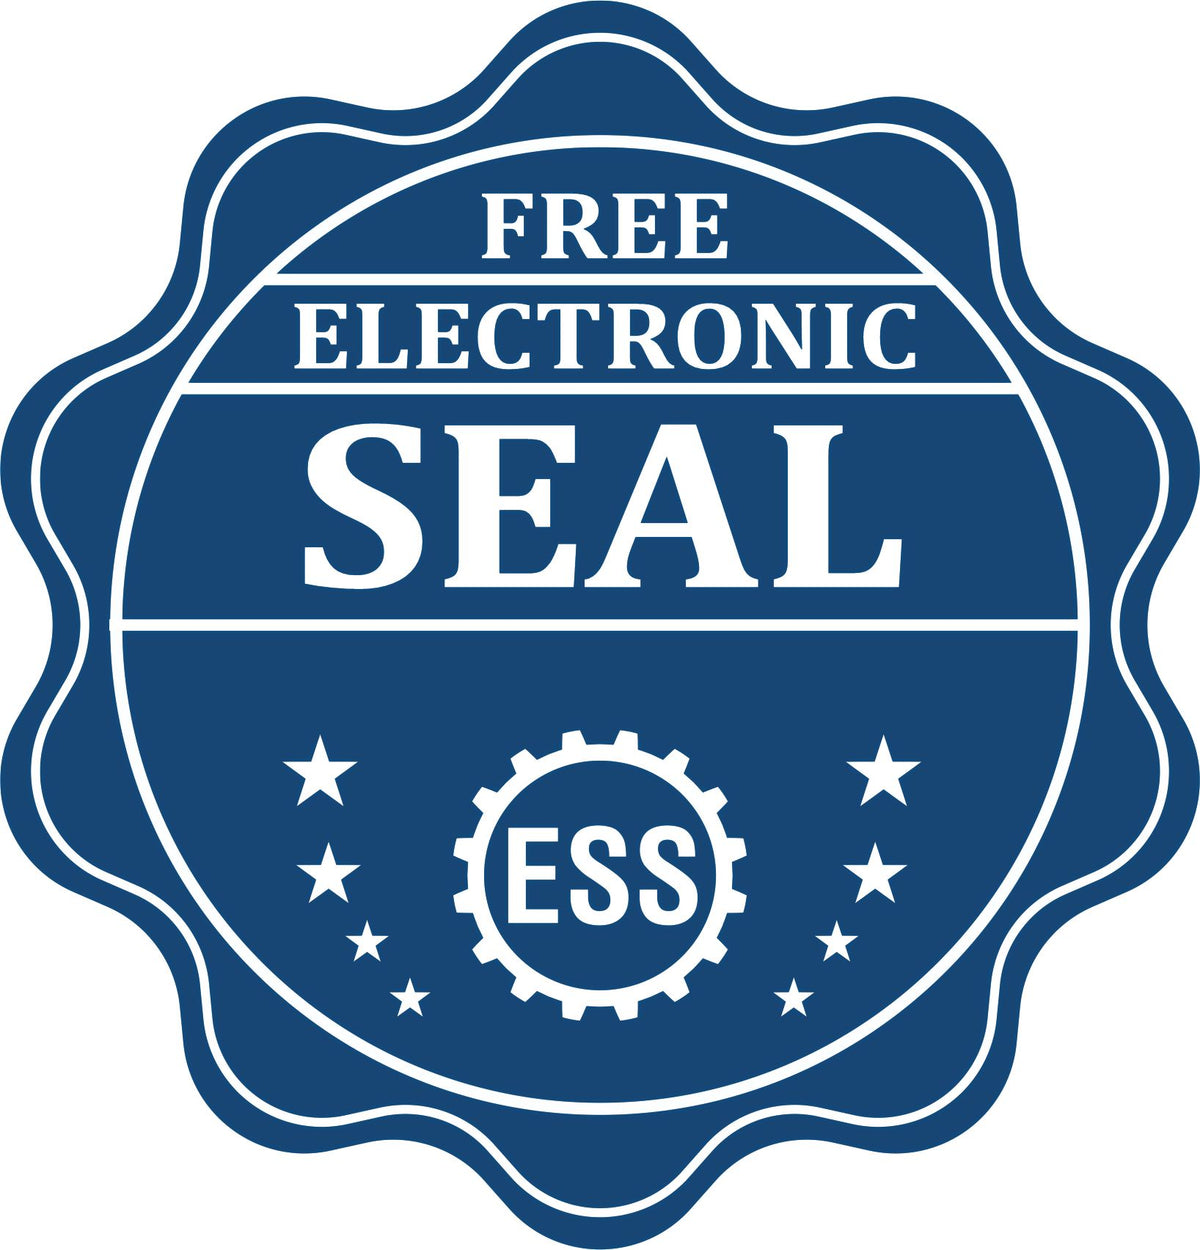 A badge showing a free electronic seal for the Heavy Duty Cast Iron Wisconsin Geologist Seal Embosser with stars and the ESS gear on the emblem.